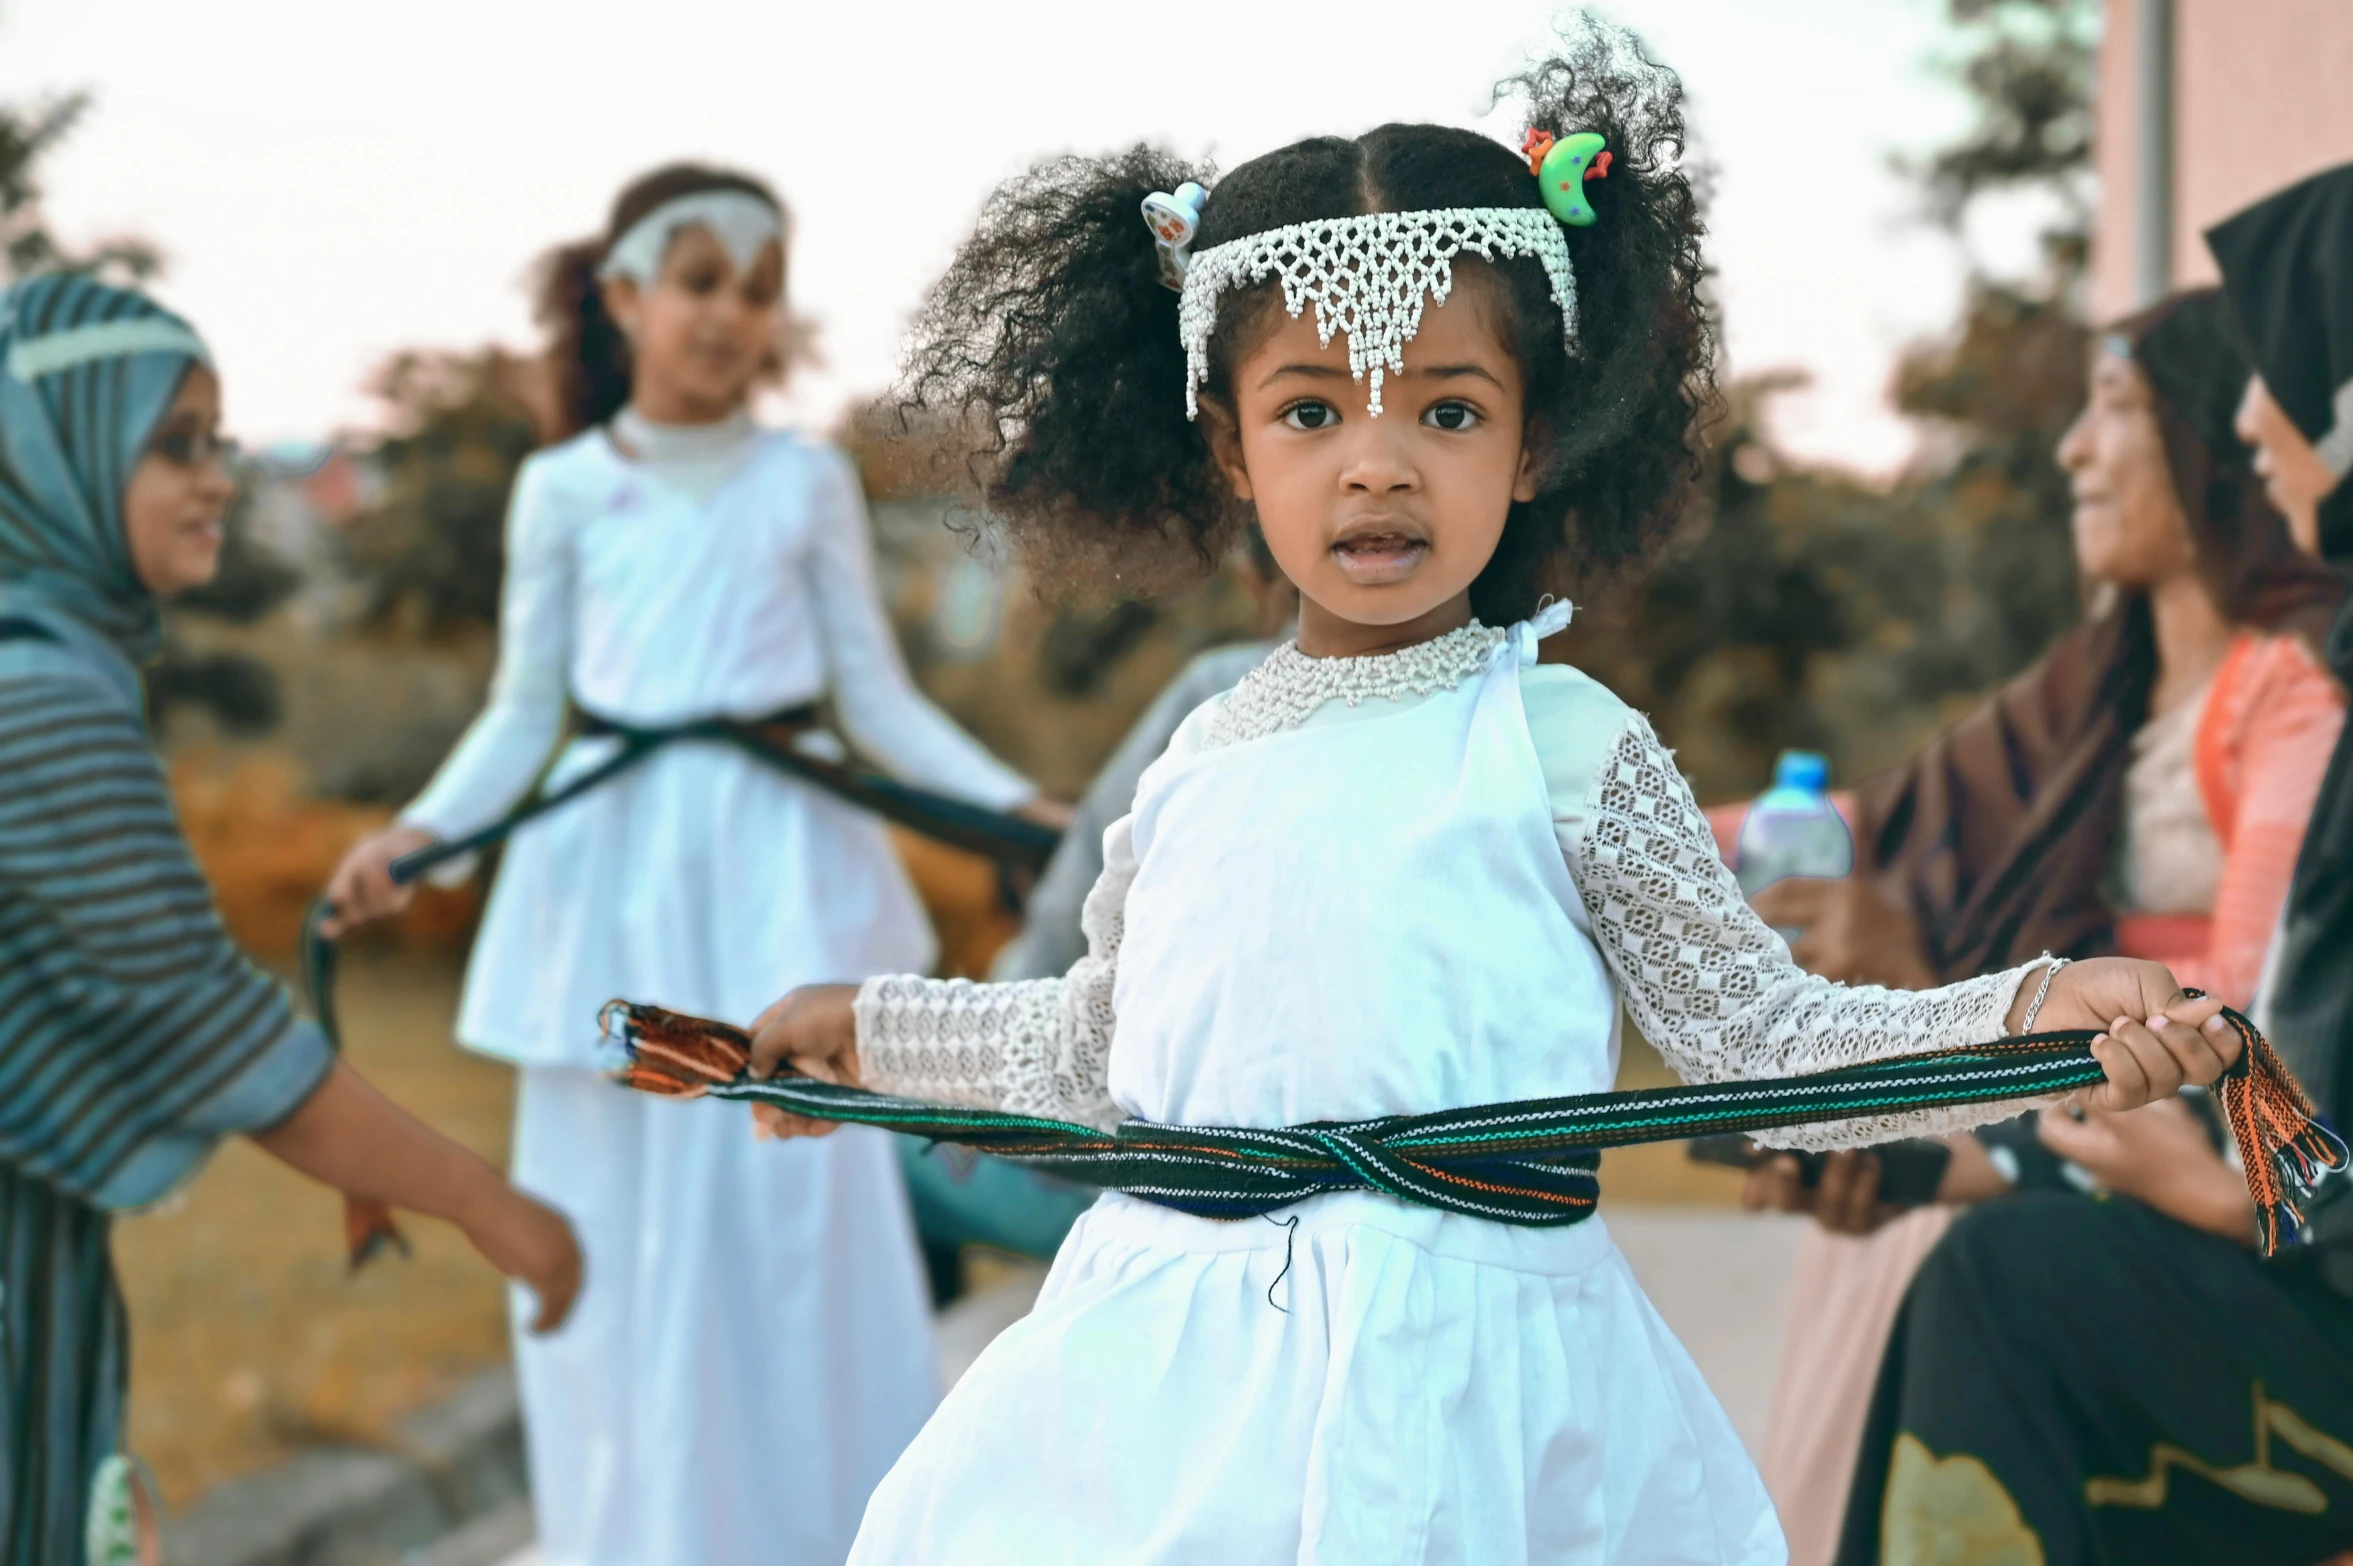 little girls in white dresses playing with a stick